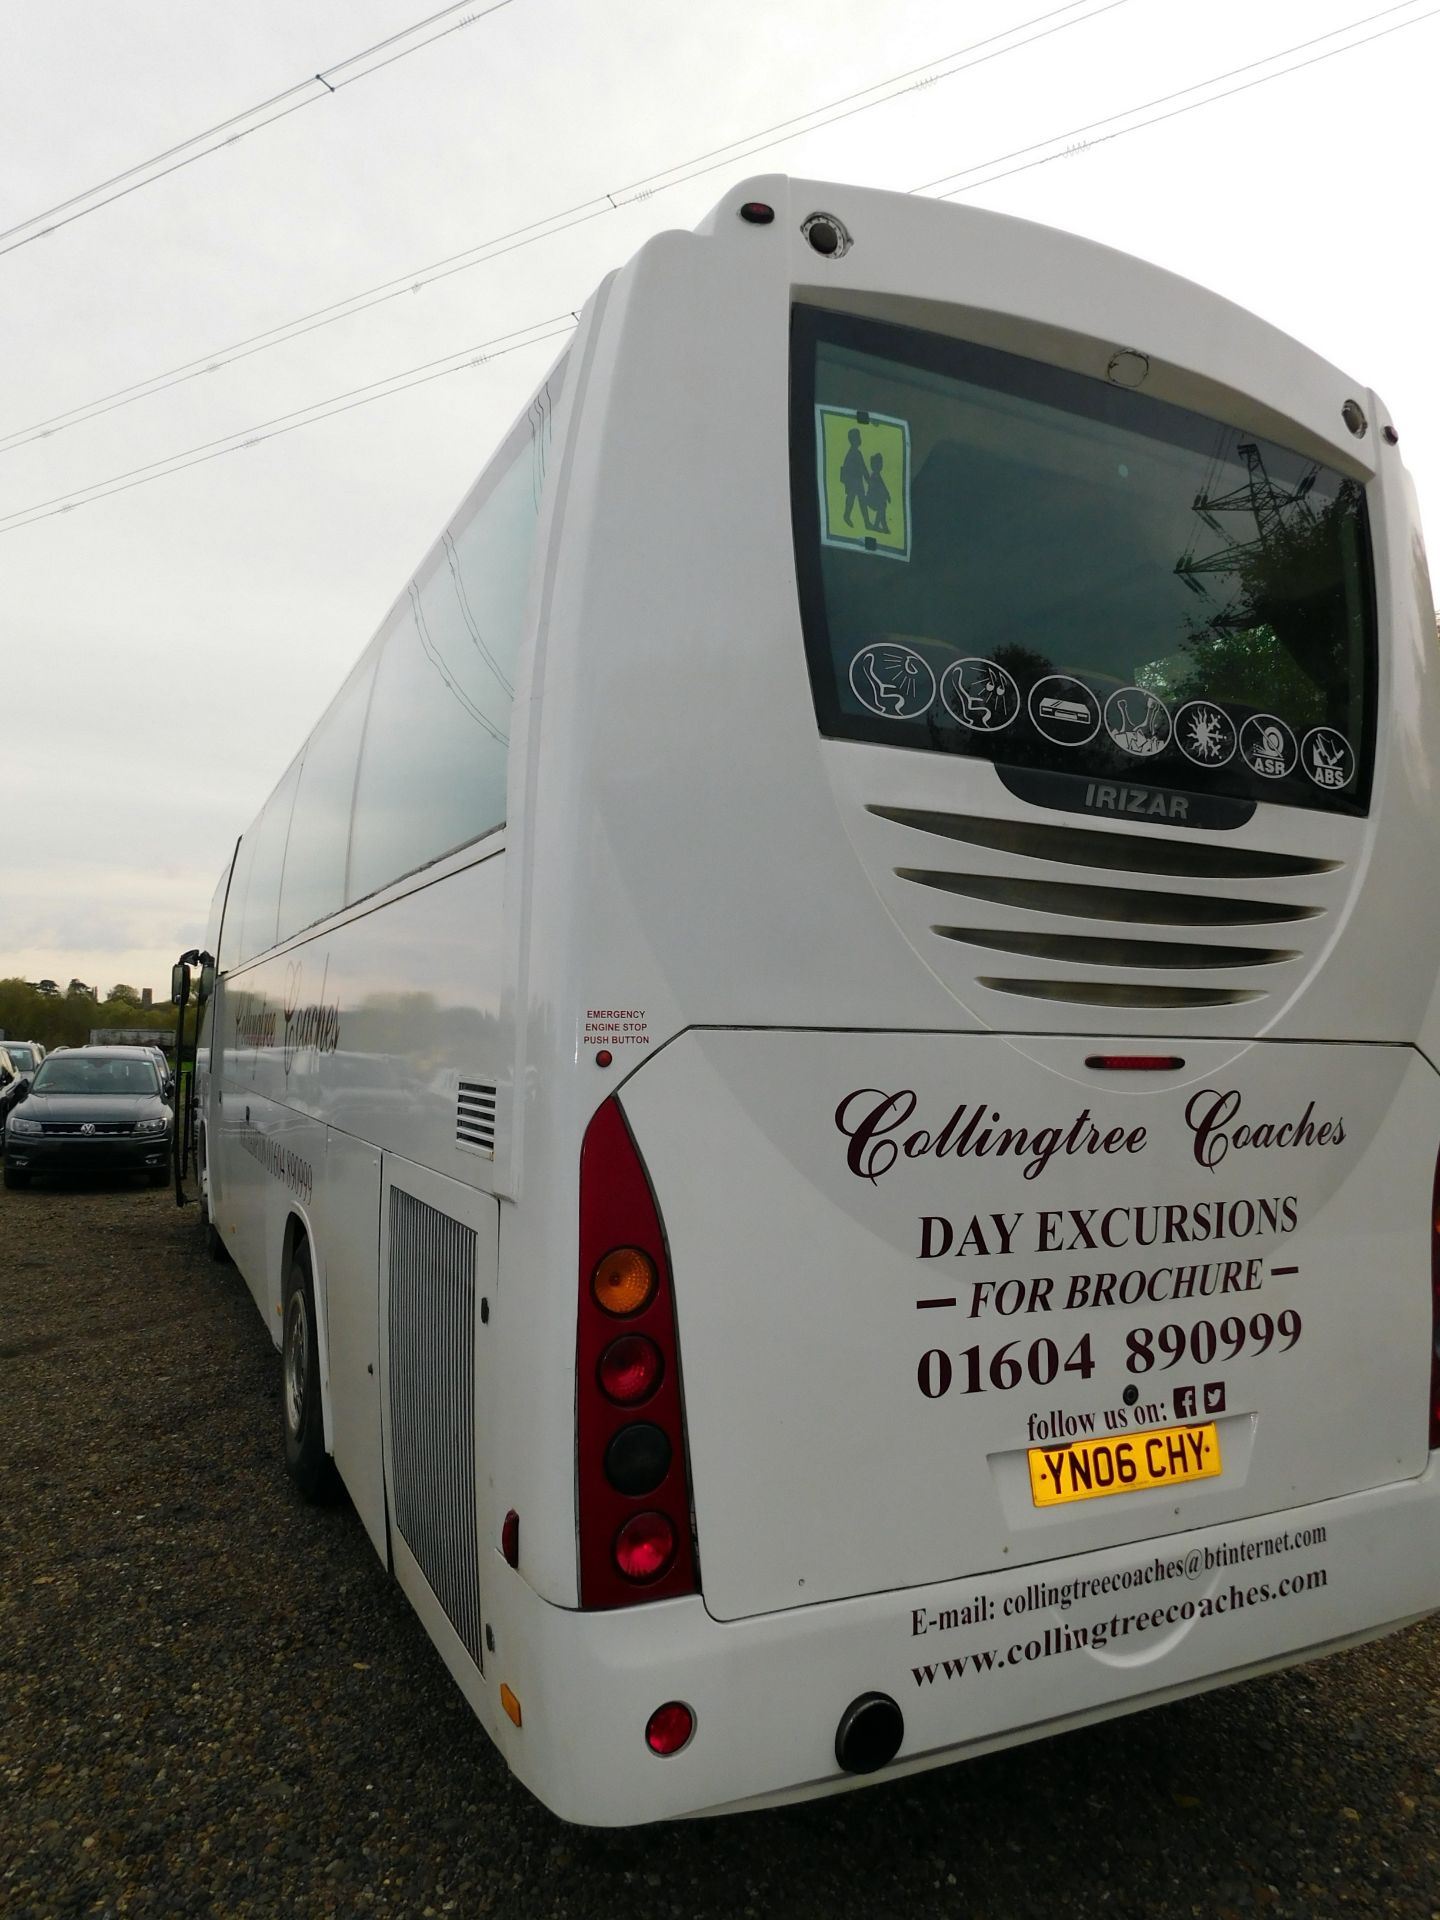 Scania Irizar K 340 EB4x2NI Euro4 53-Seat Coach, Registration Number YN06 CHY, First Registered 2nd - Image 5 of 27